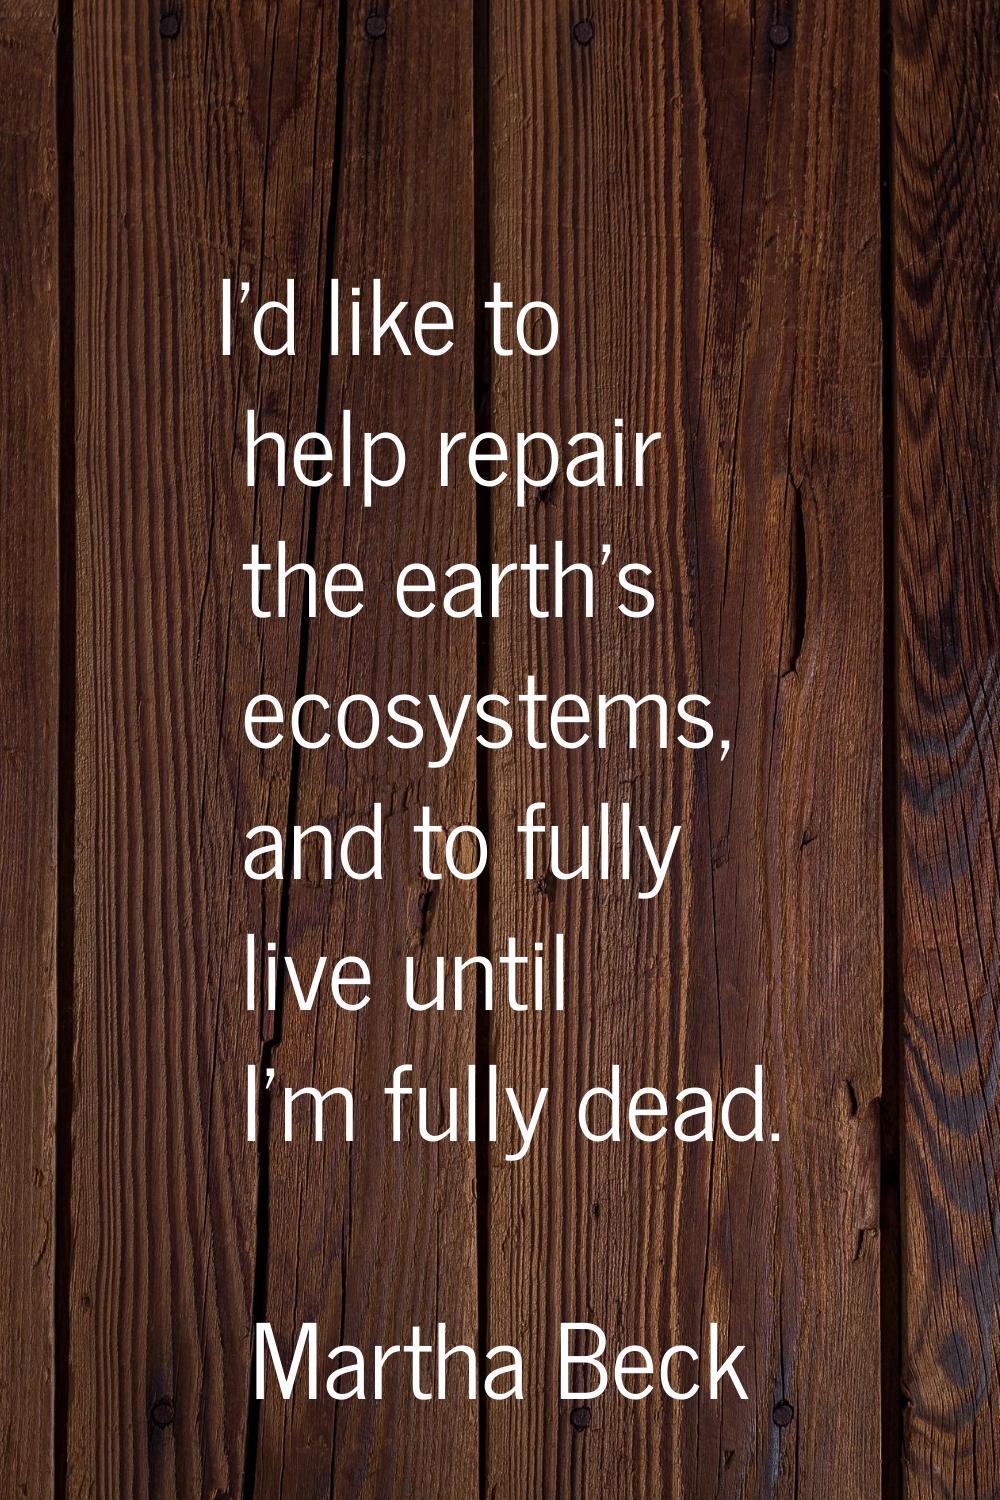 I'd like to help repair the earth's ecosystems, and to fully live until I'm fully dead.